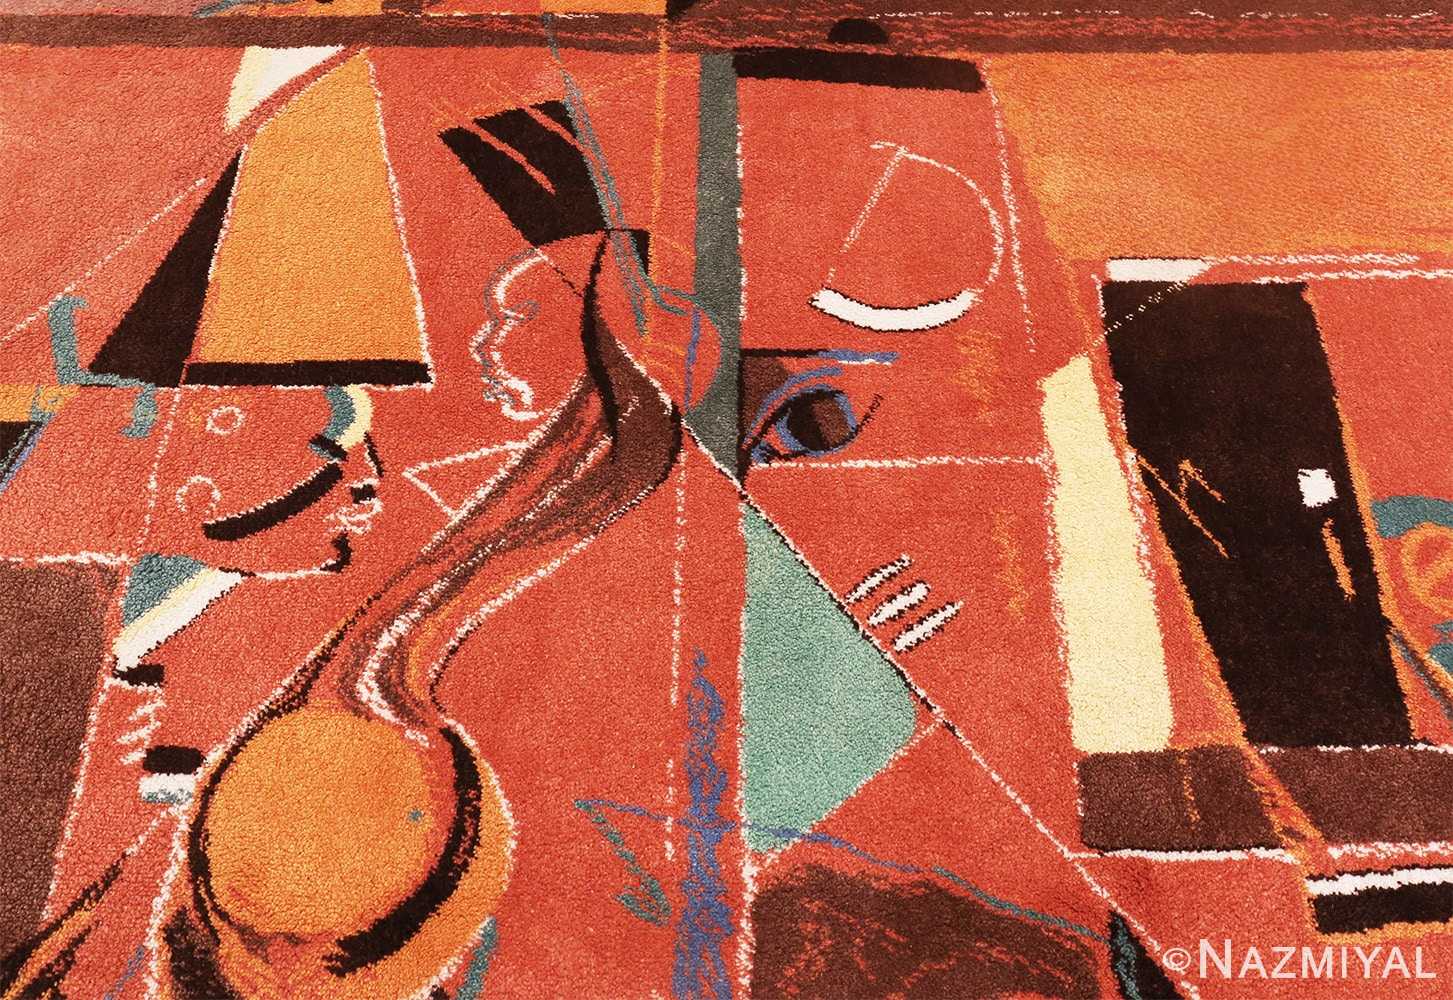 Picture of the center details of the Image of the weave of the Vintage Miles Davis Jazz Scene Art Rug 70066